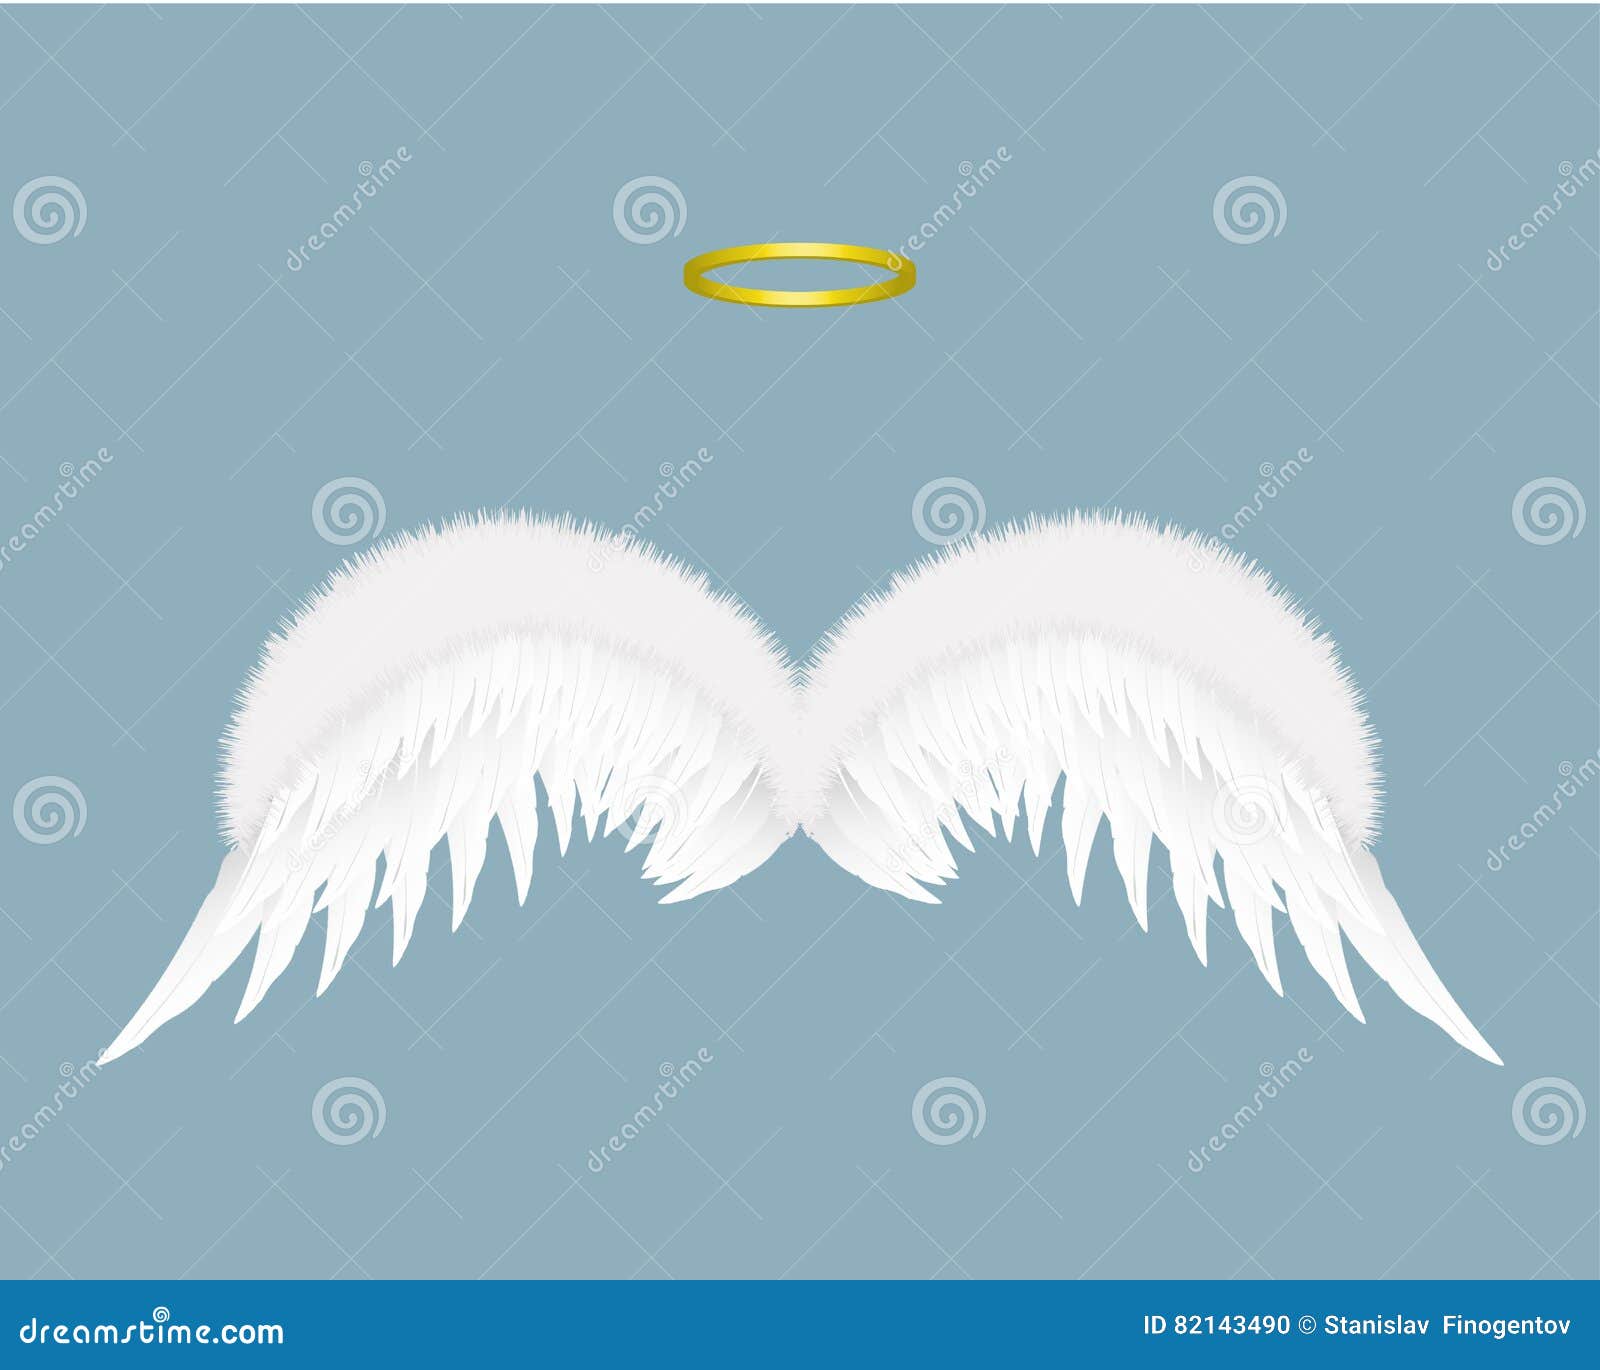 angel wings and halo  on background.  .